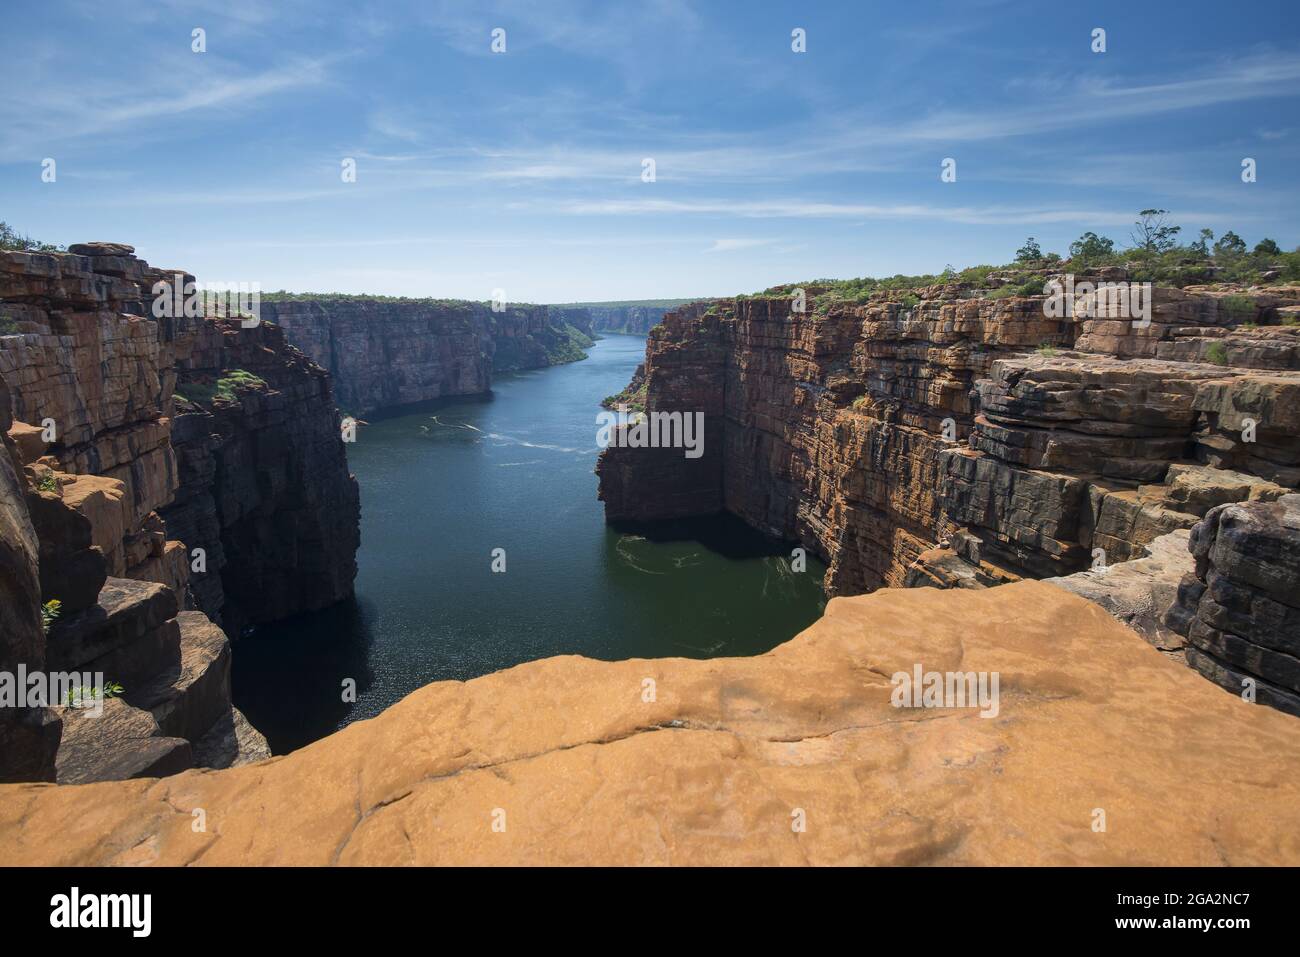 Springtime at the lookout at the King George River waterfall in the Kimberley Region, looking through the sandstone cliffs overlooking the river below Stock Photo